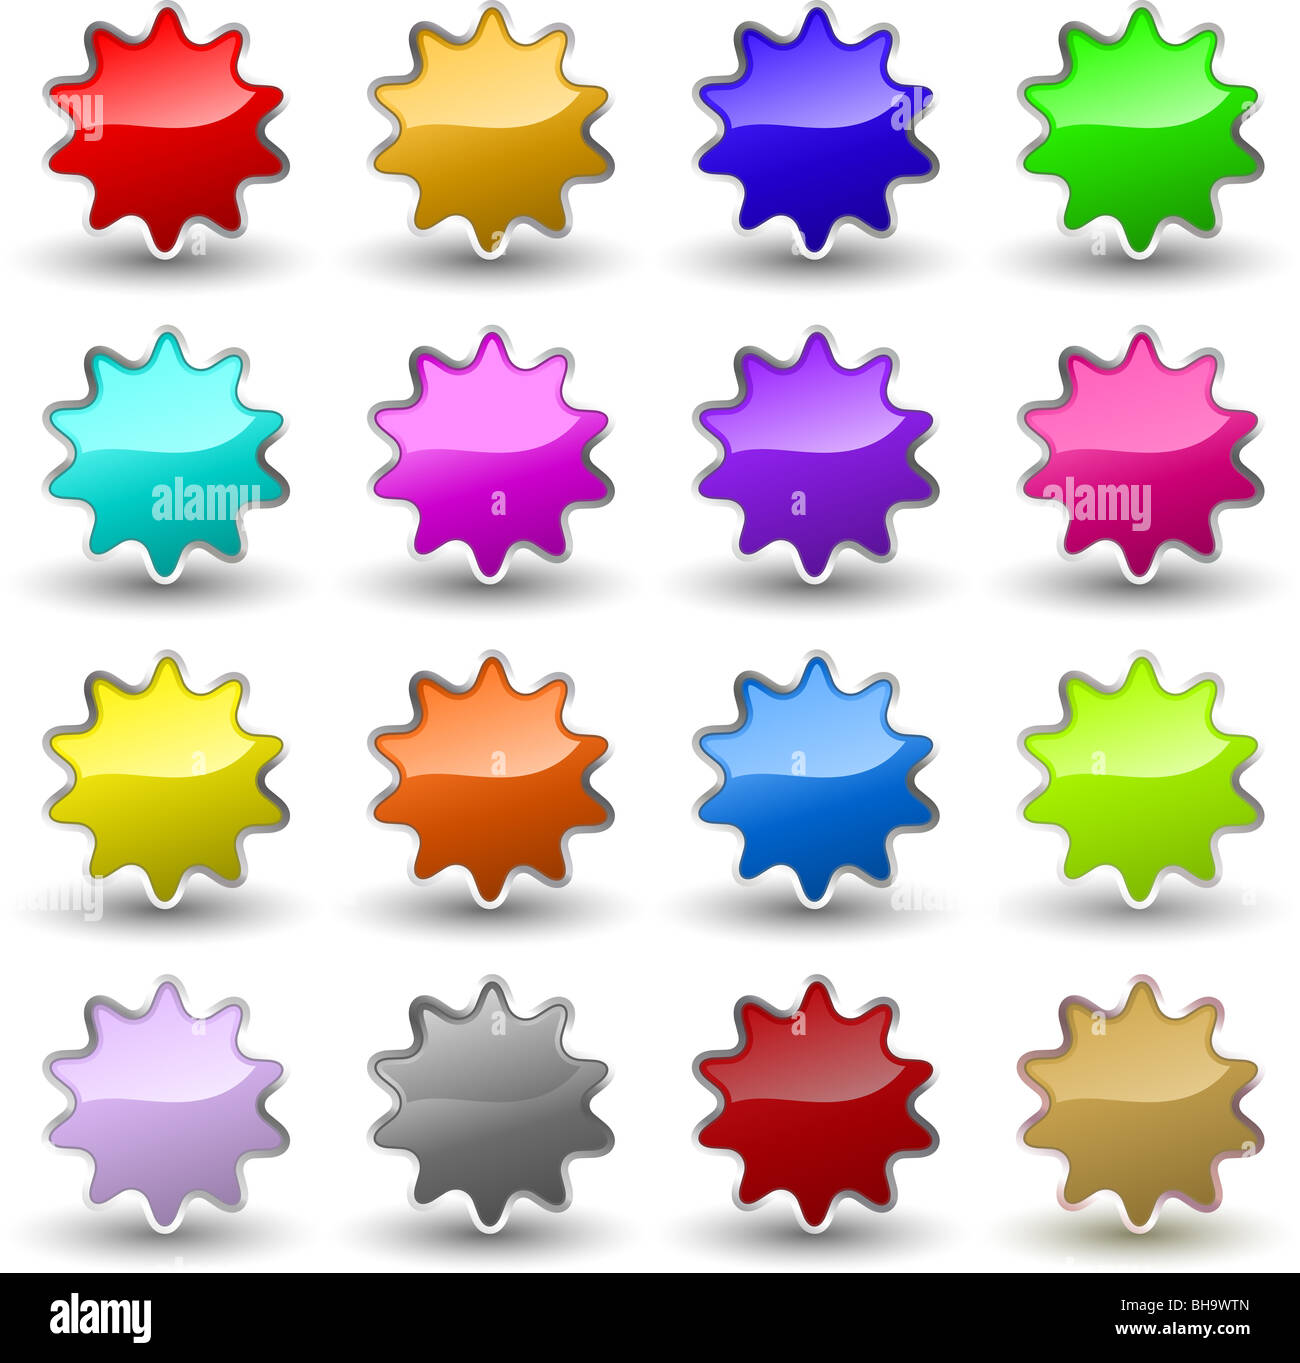 Different coloured glossy star icons Stock Photo